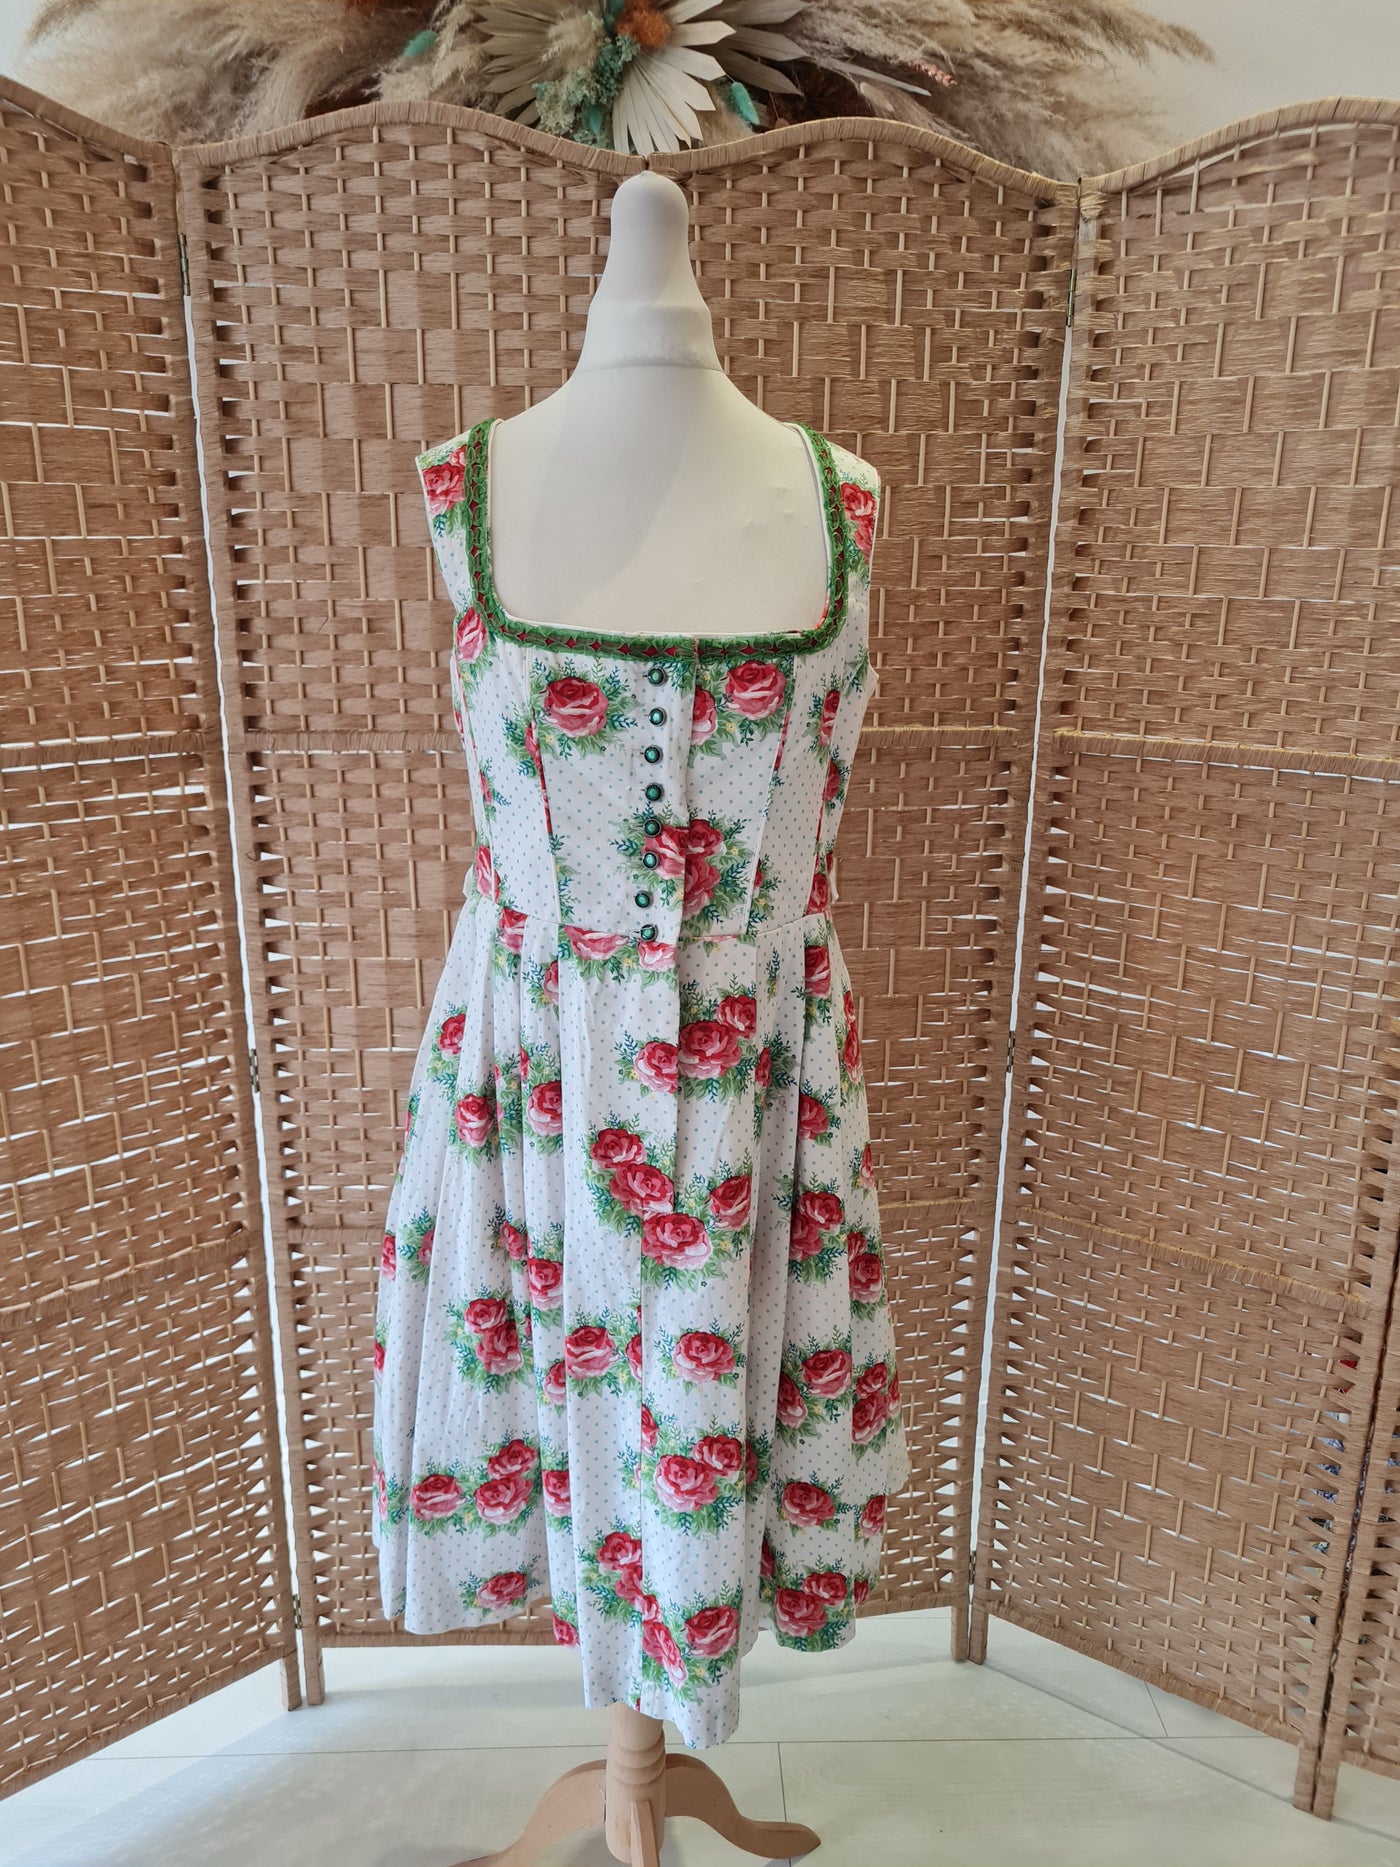 Country Rose - German Dress - 1950s Swing Style 12